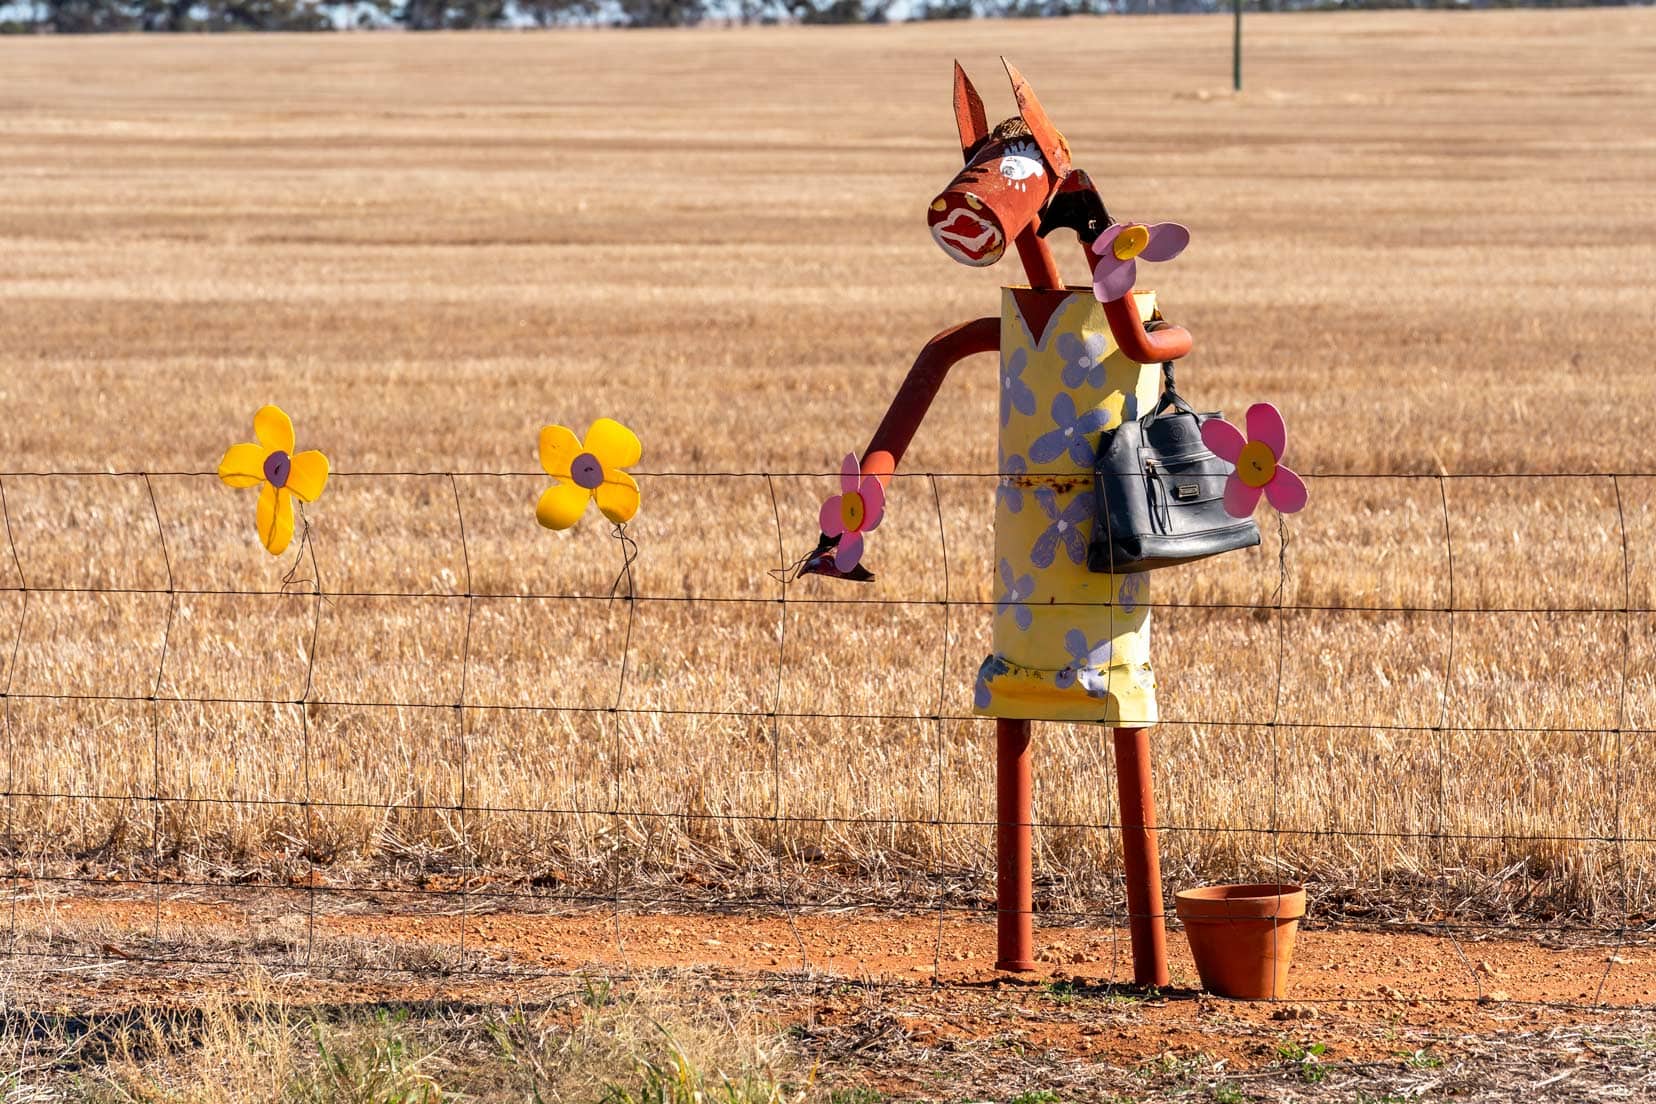 Tin-horse-highway-Kulin horse in a daisy dress with flowers on the fence and gardening